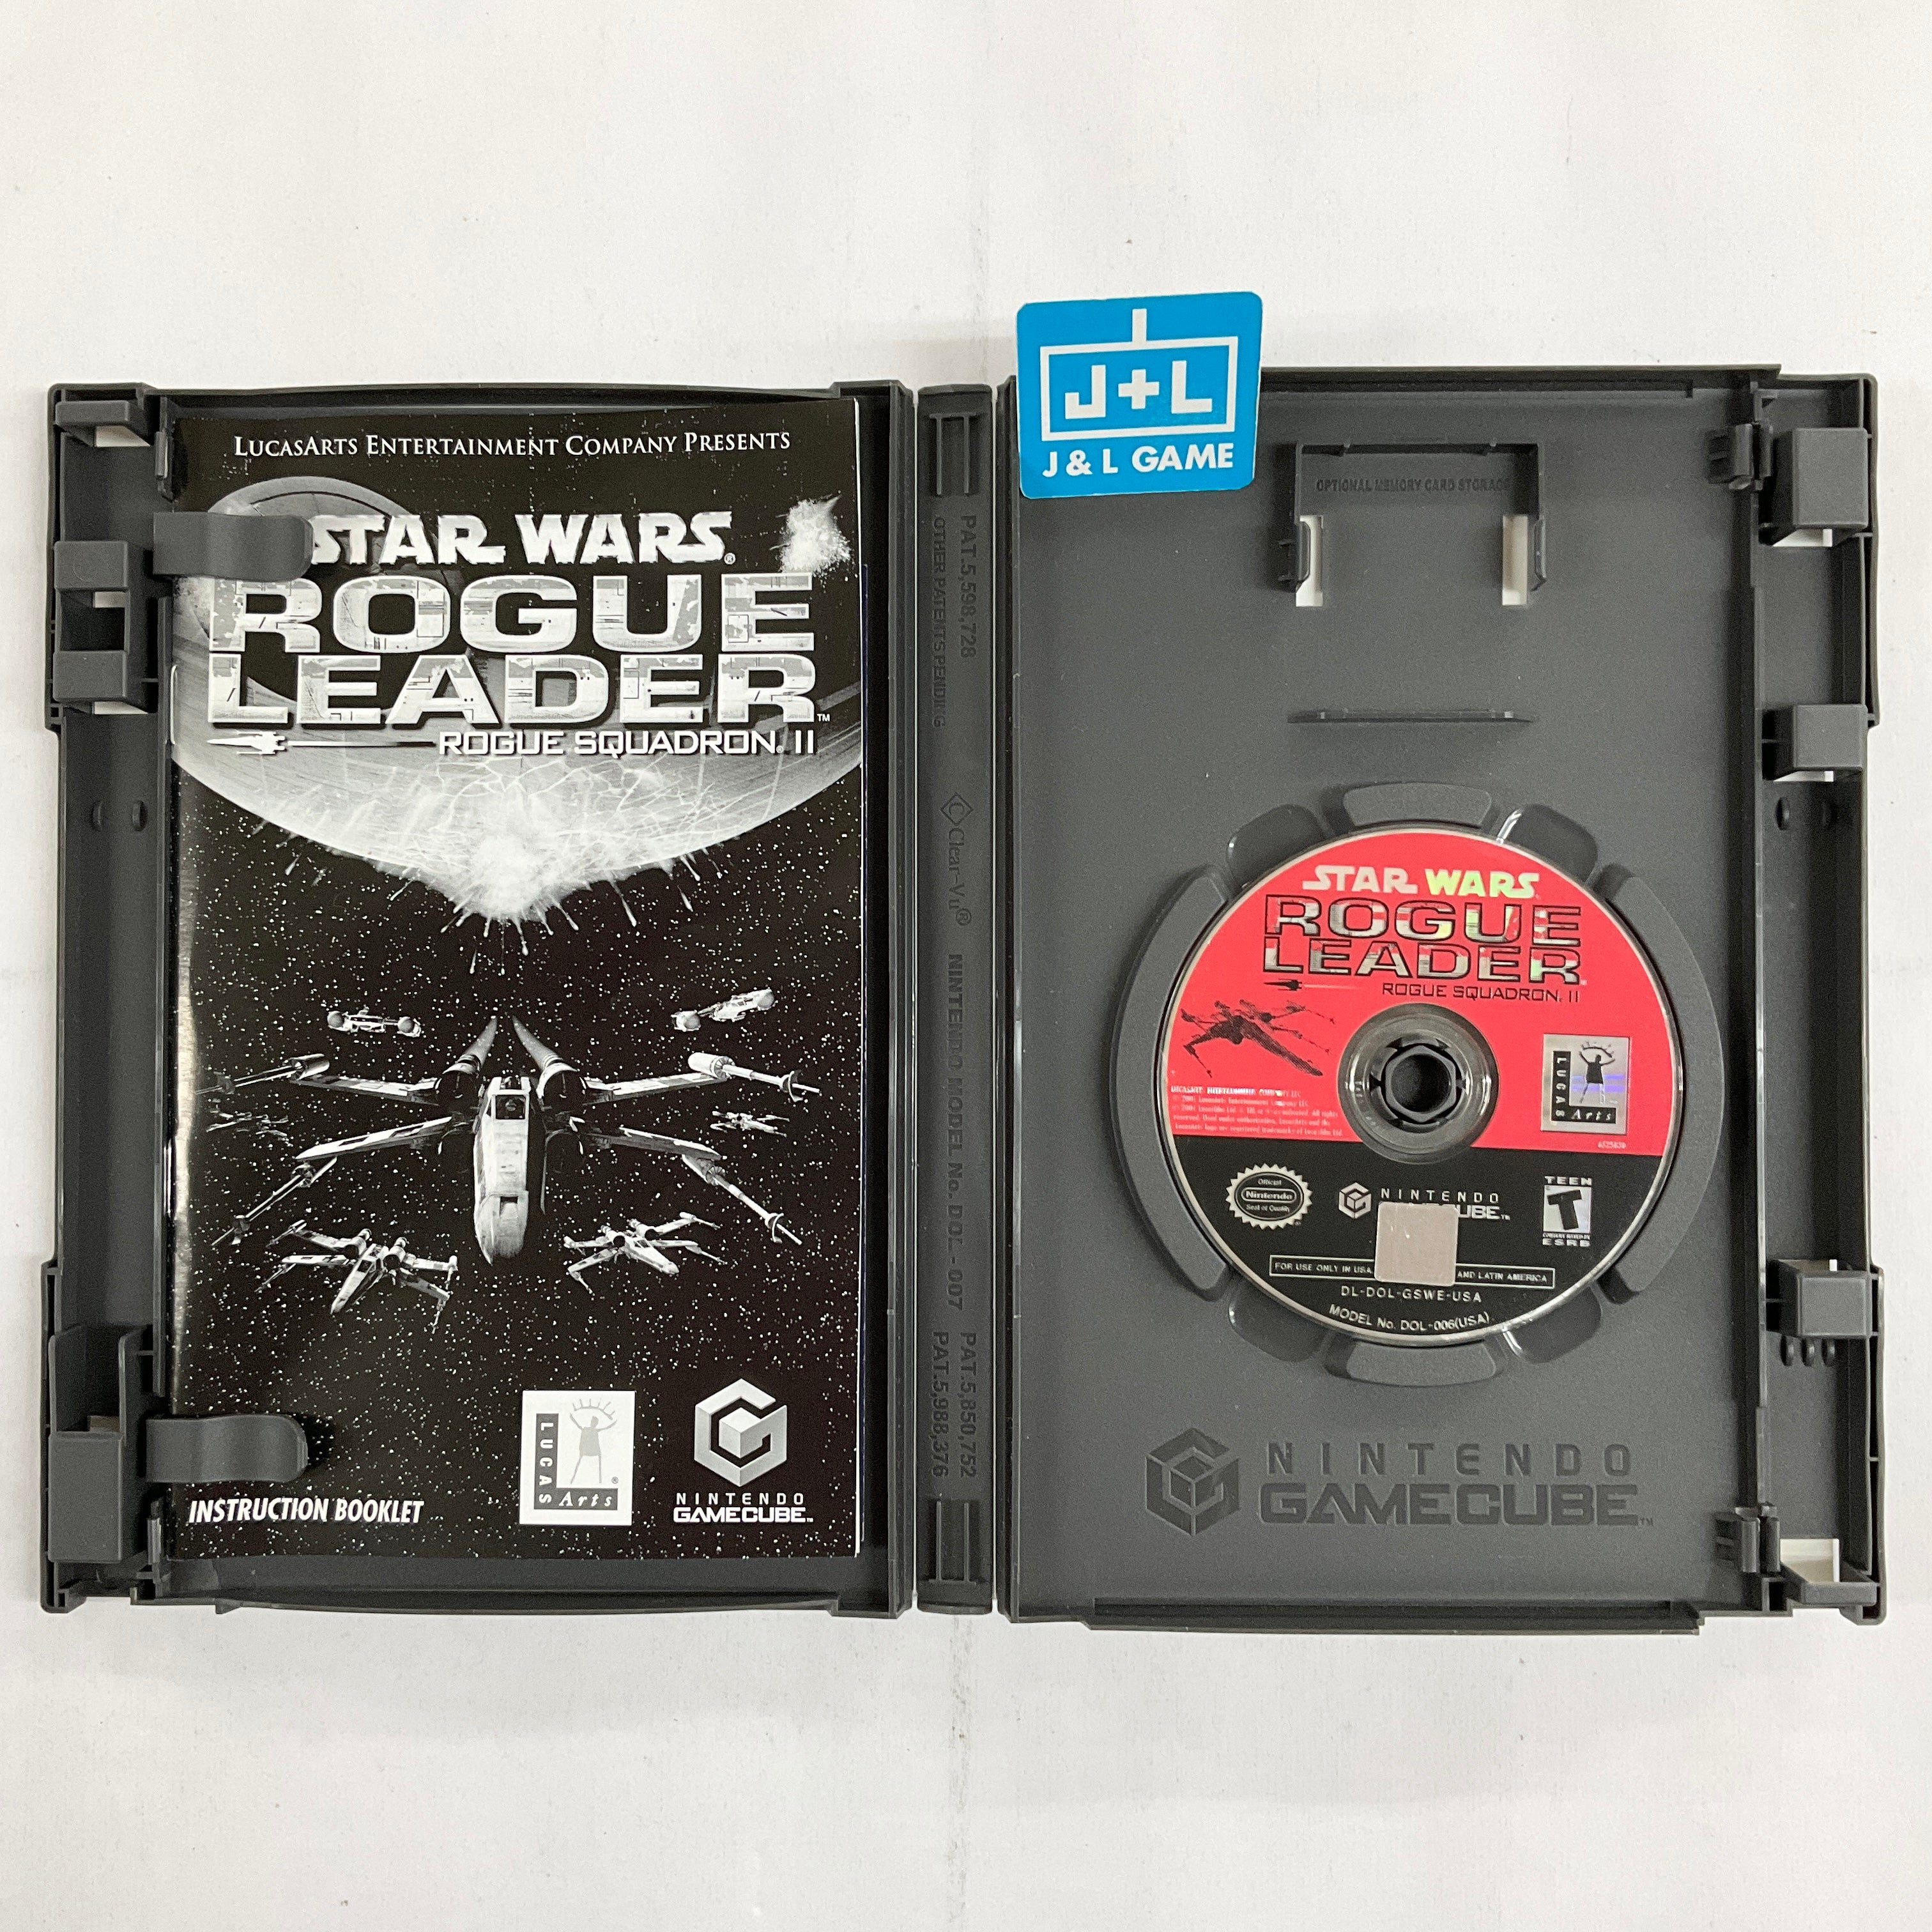 Star Wars Rogue Squadron II: Rogue Leader (Player's Choice) - (GC) GameCube [Pre-Owned] Video Games LucasArts   